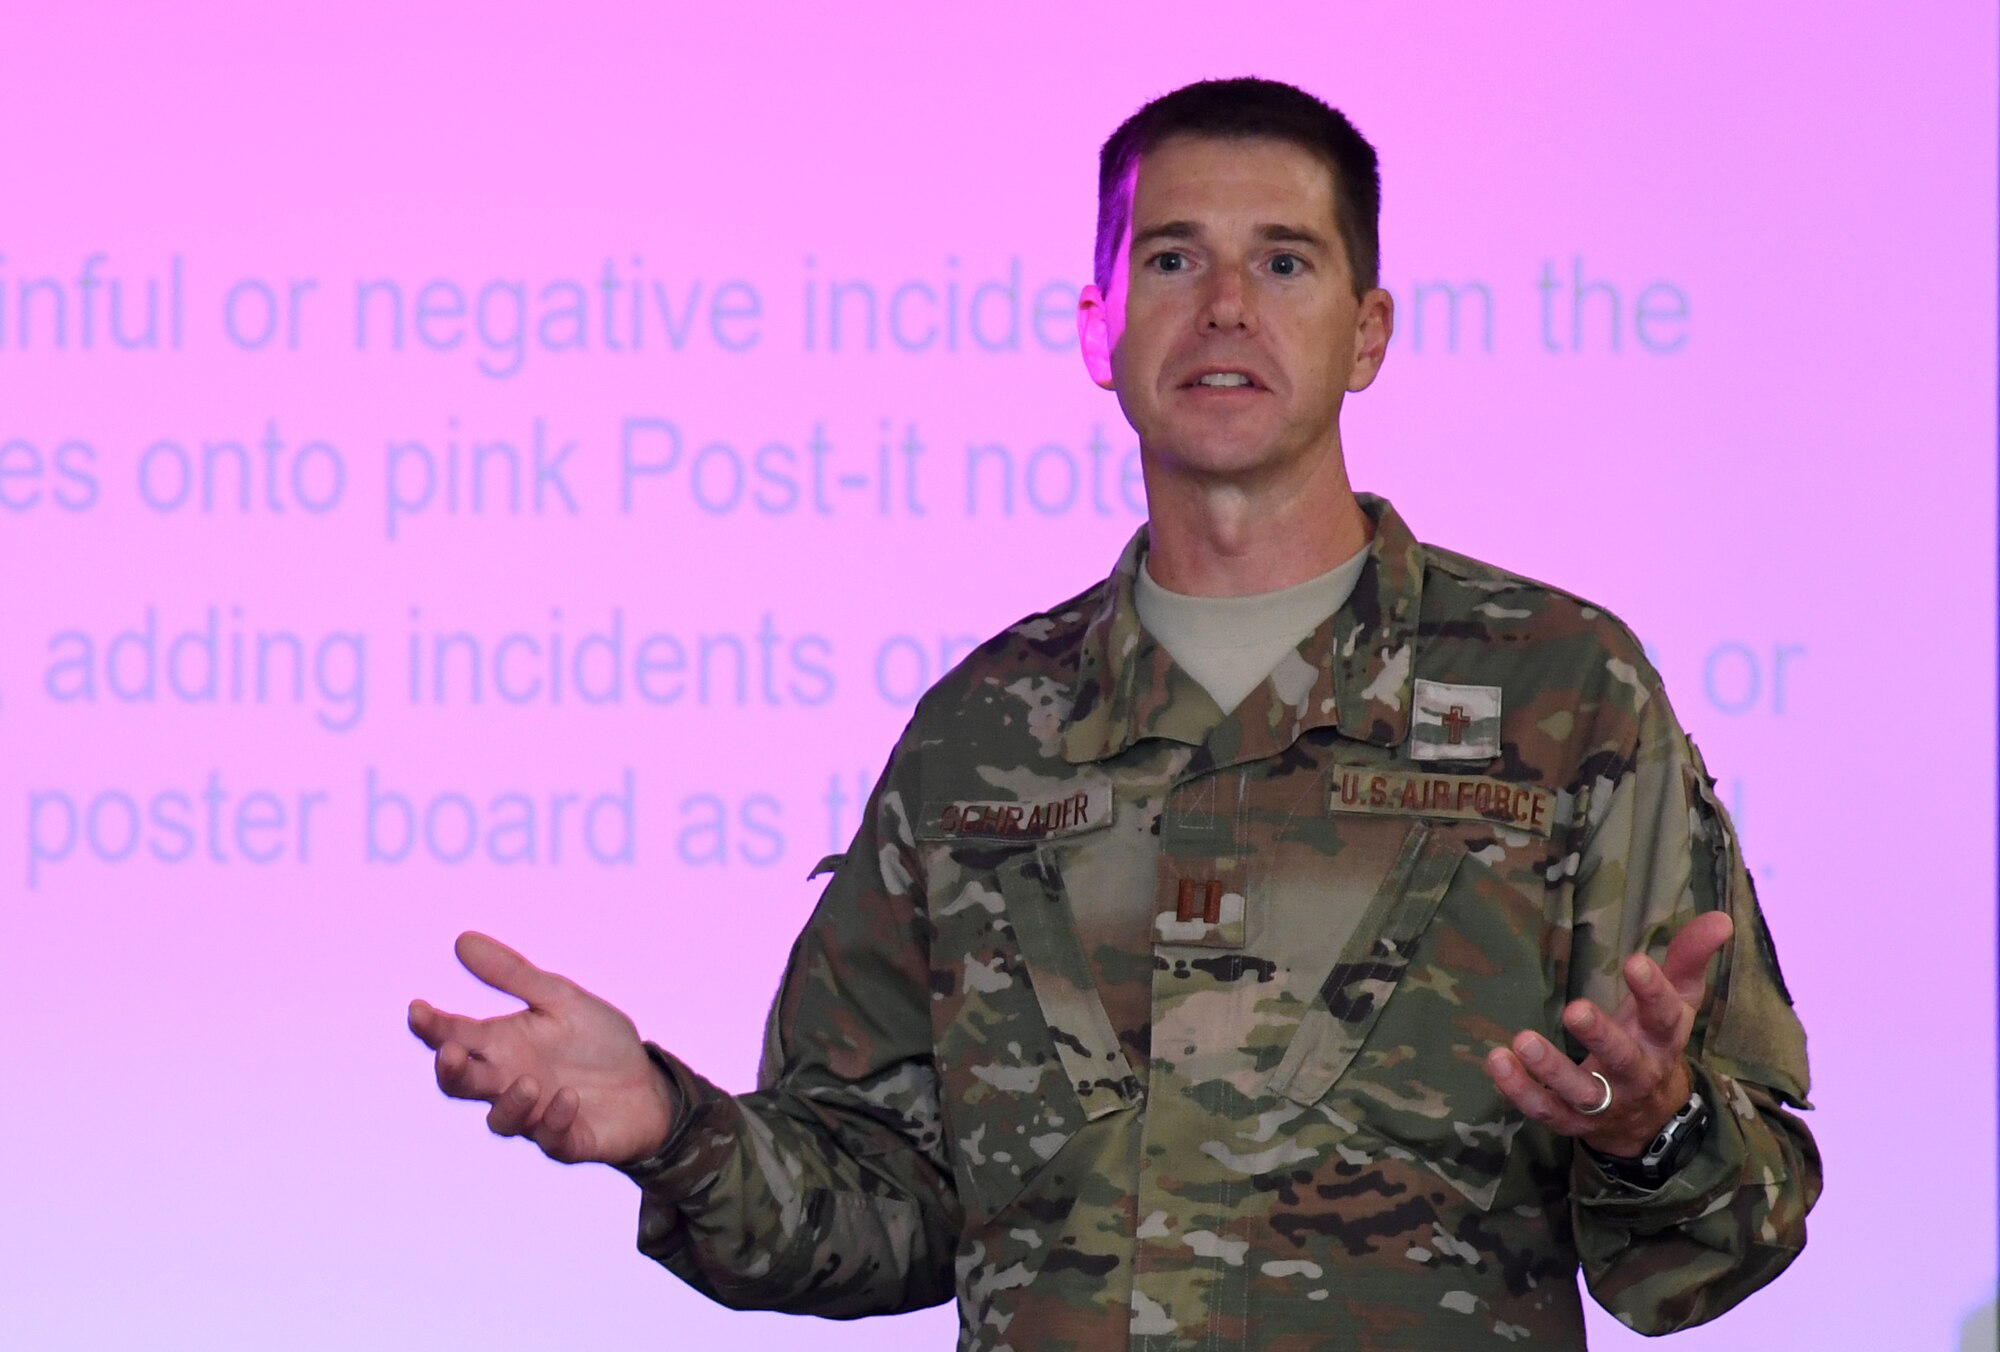 U.S. Air Force Chaplain (Capt.) Darrel Schrader, 81st Training Wing chaplain, delivers instruction to students for an "A Life-Mapping Experience" exercise during the Leadership Enhancement and Development Seminar inside the Airman Leadership School building at Keesler Air Force Base, Mississippi, Nov. 5, 2019. The three-day course, which is open to all supervisors, is meant to enhance effective communication, skillful interpersonal interaction and emotional intelligence in the military environment by using an active learning format that emphasizes discussion  and minimizes lecture. (U.S. Air Force photo by Kemberly Groue)